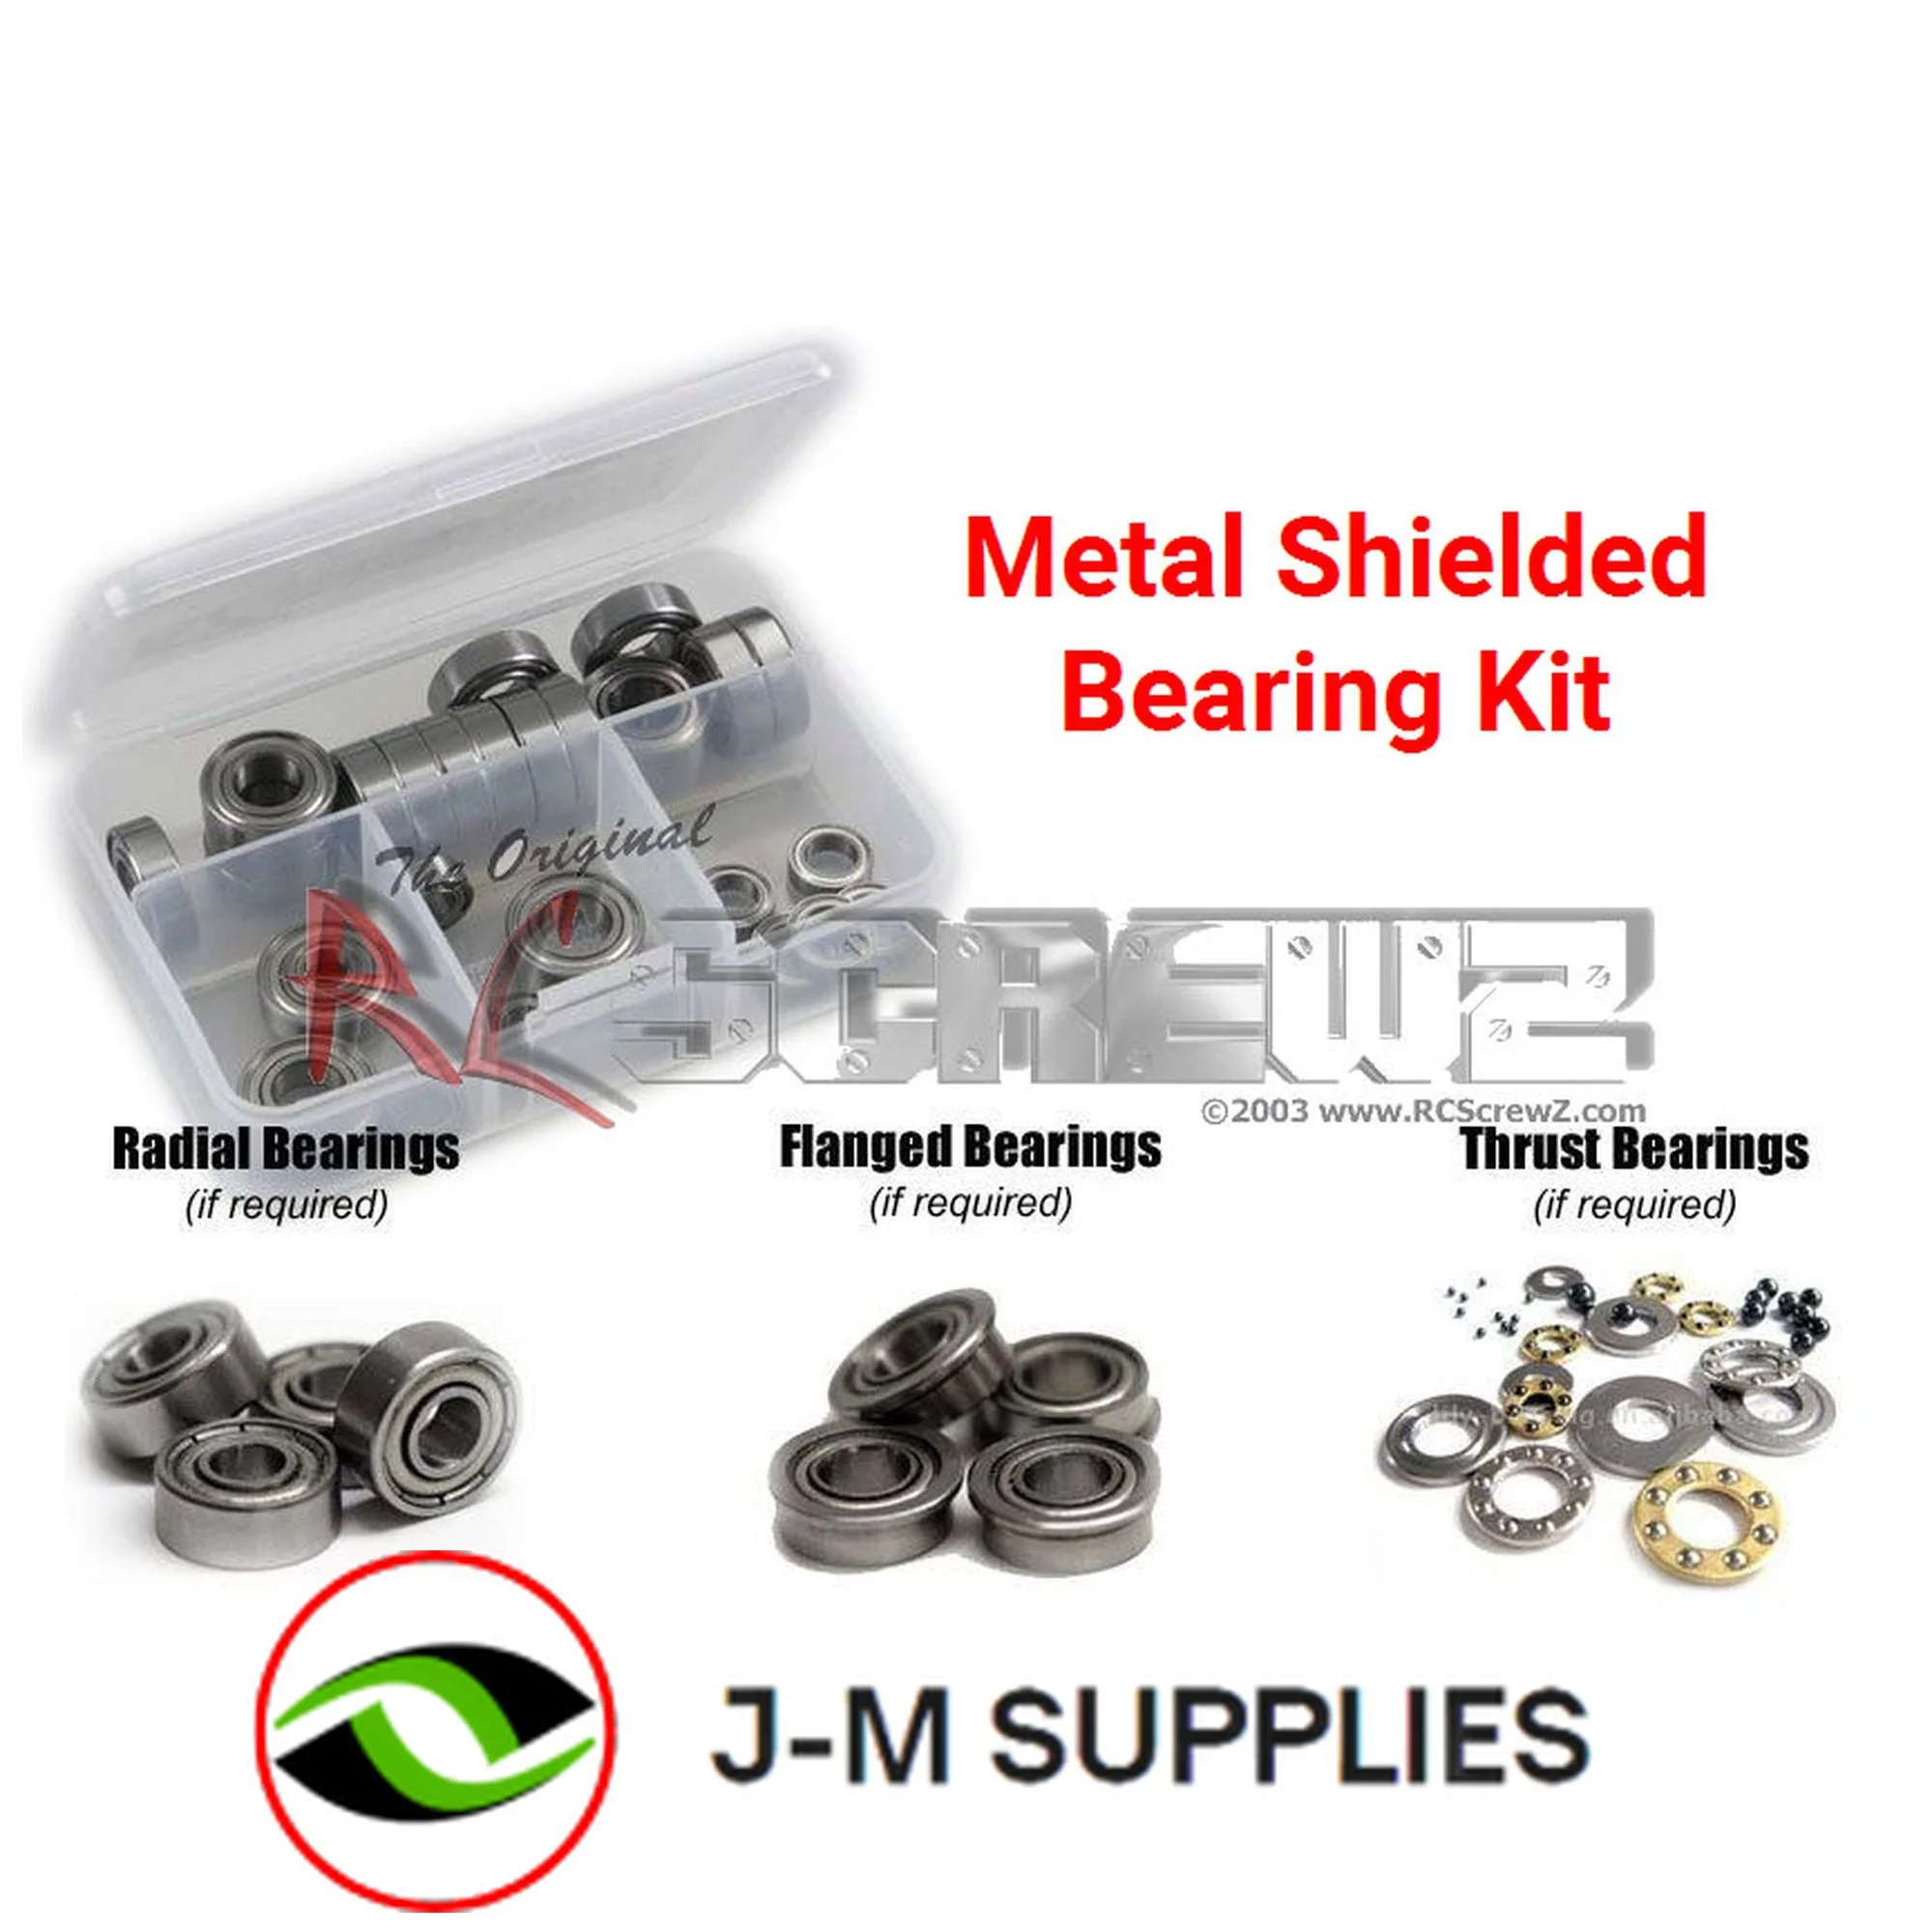 RCScrewZ Metal Shielded Bearing Kit xra151b for XRAY X1 2020 #370705 - Picture 1 of 12